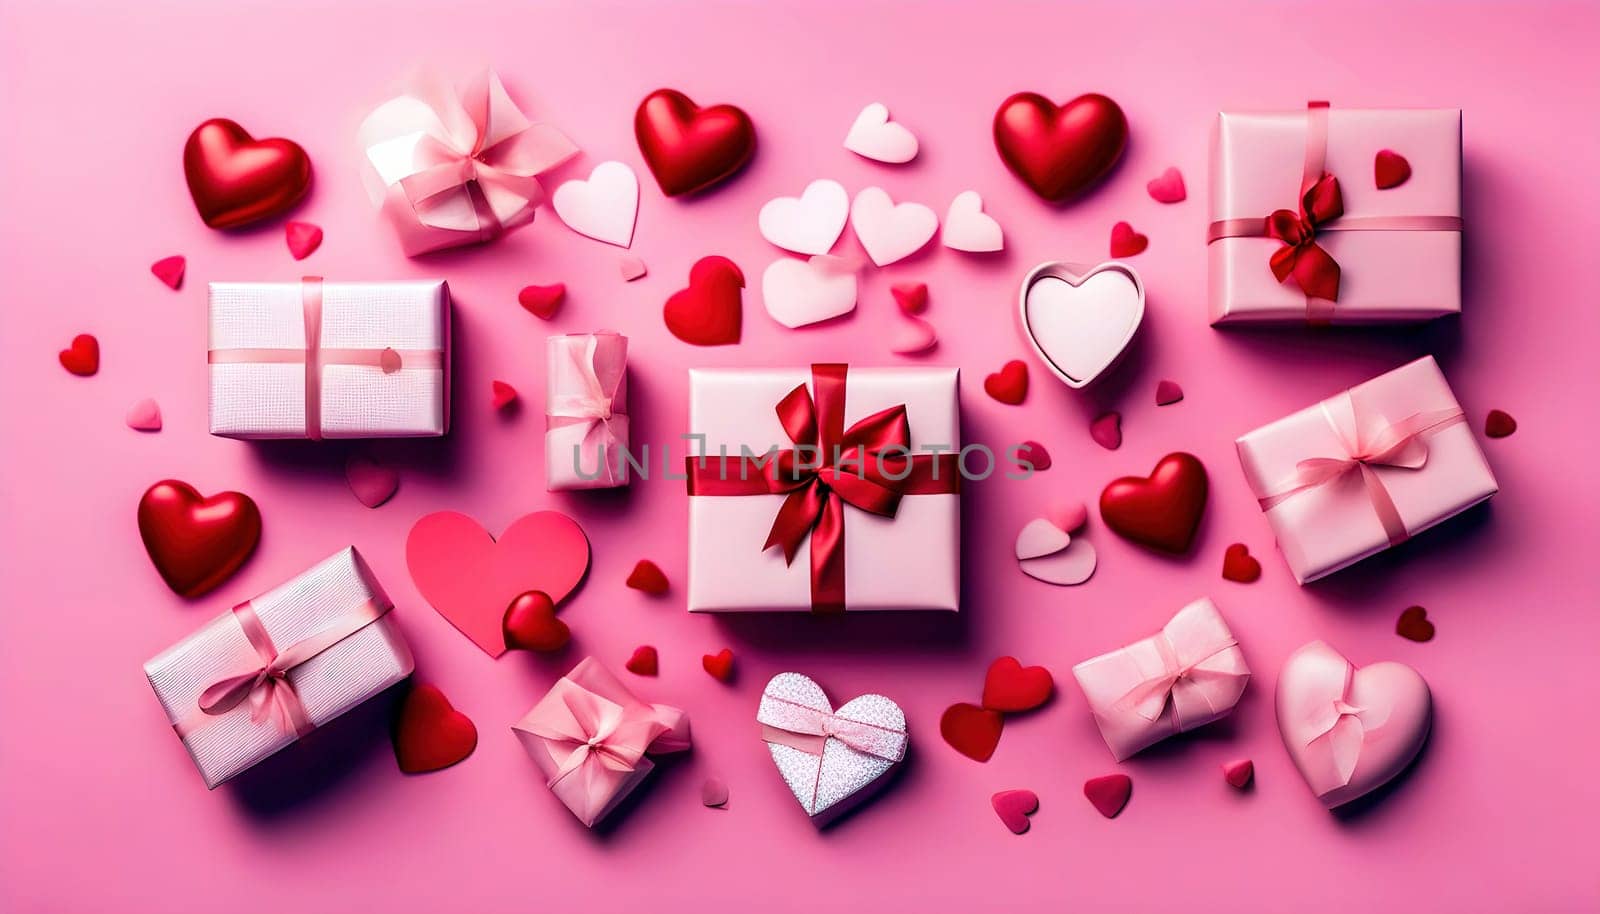 Valentine's Day Gifts and Decorations on Pink Background by rostik924